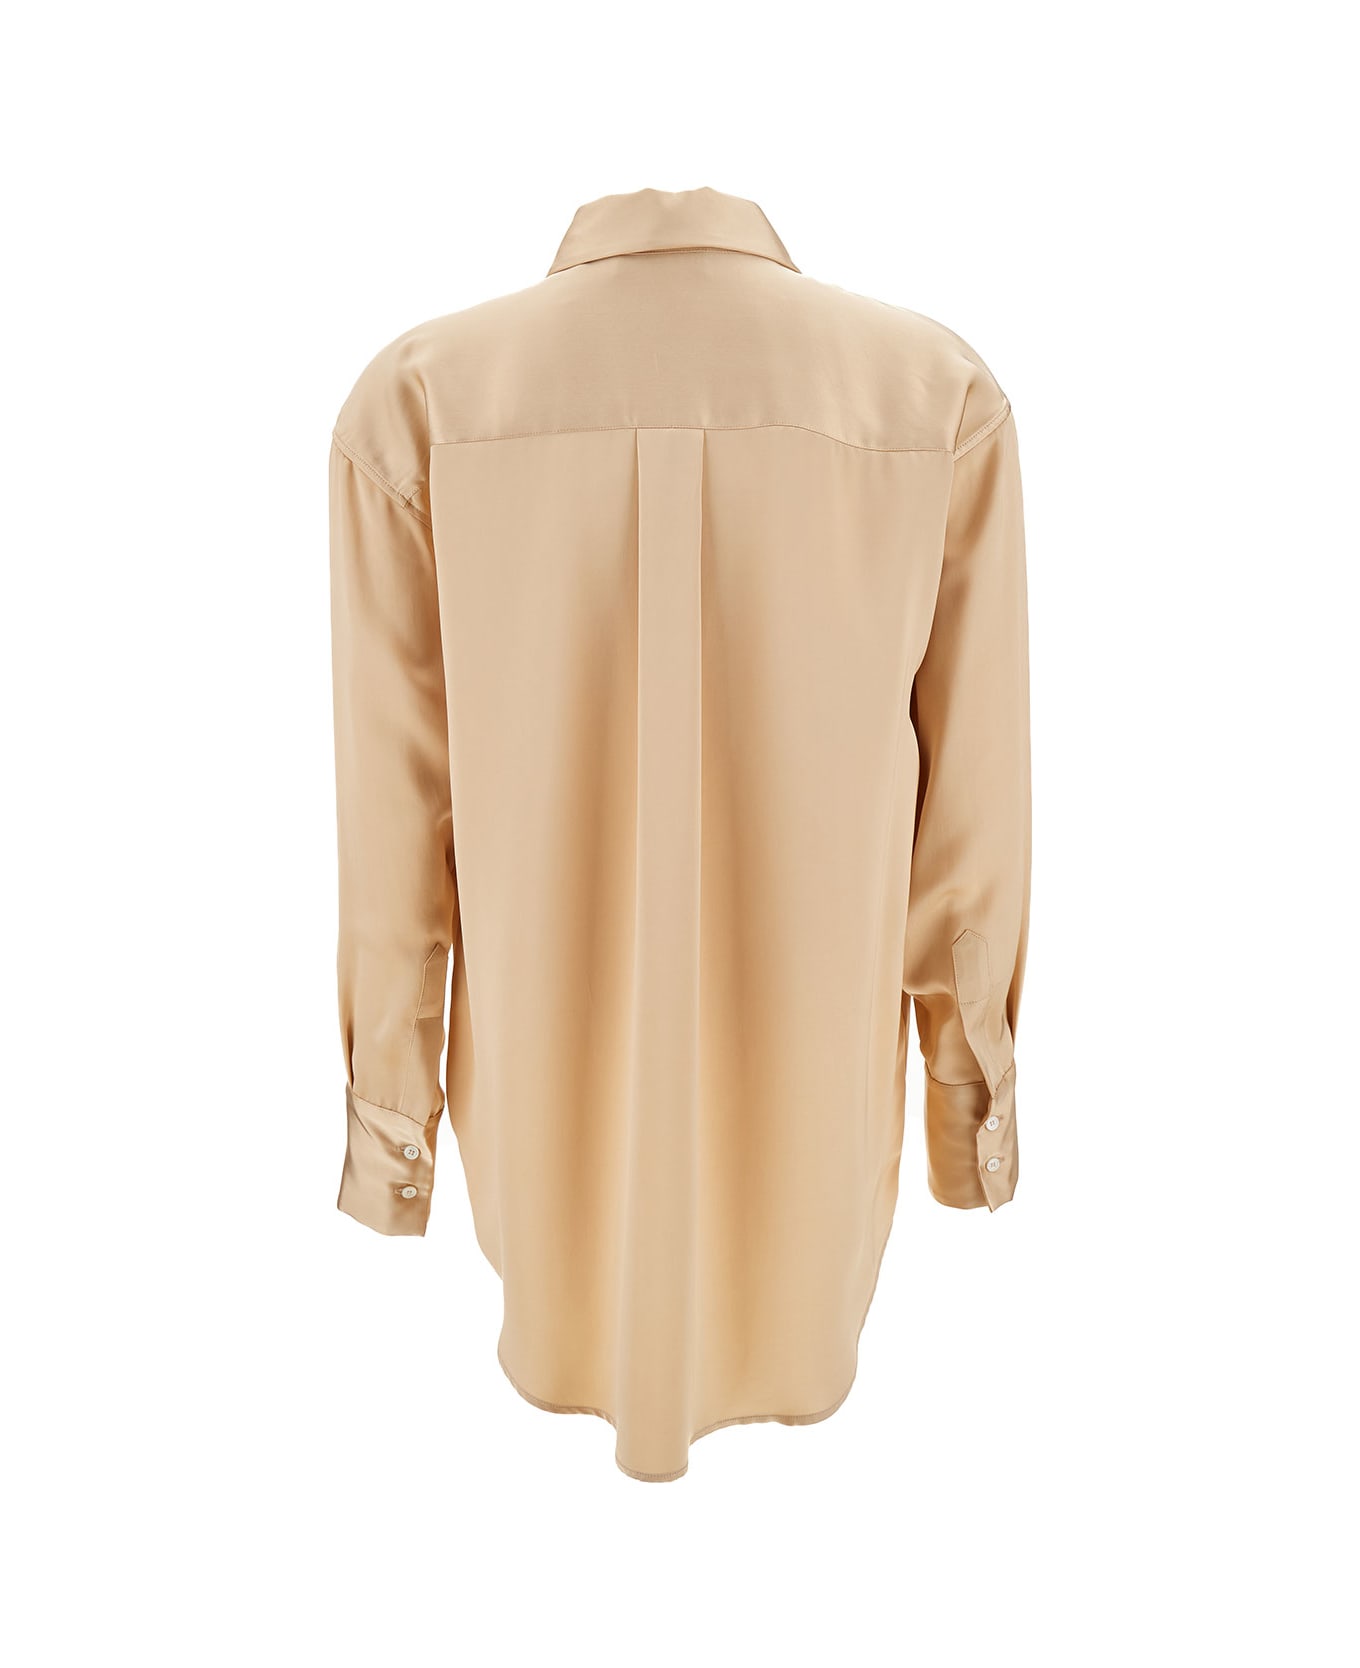 Fabiana Filippi Champagne Loose Shirt With Long Sleeve In Satin Fabric Woman - Beige